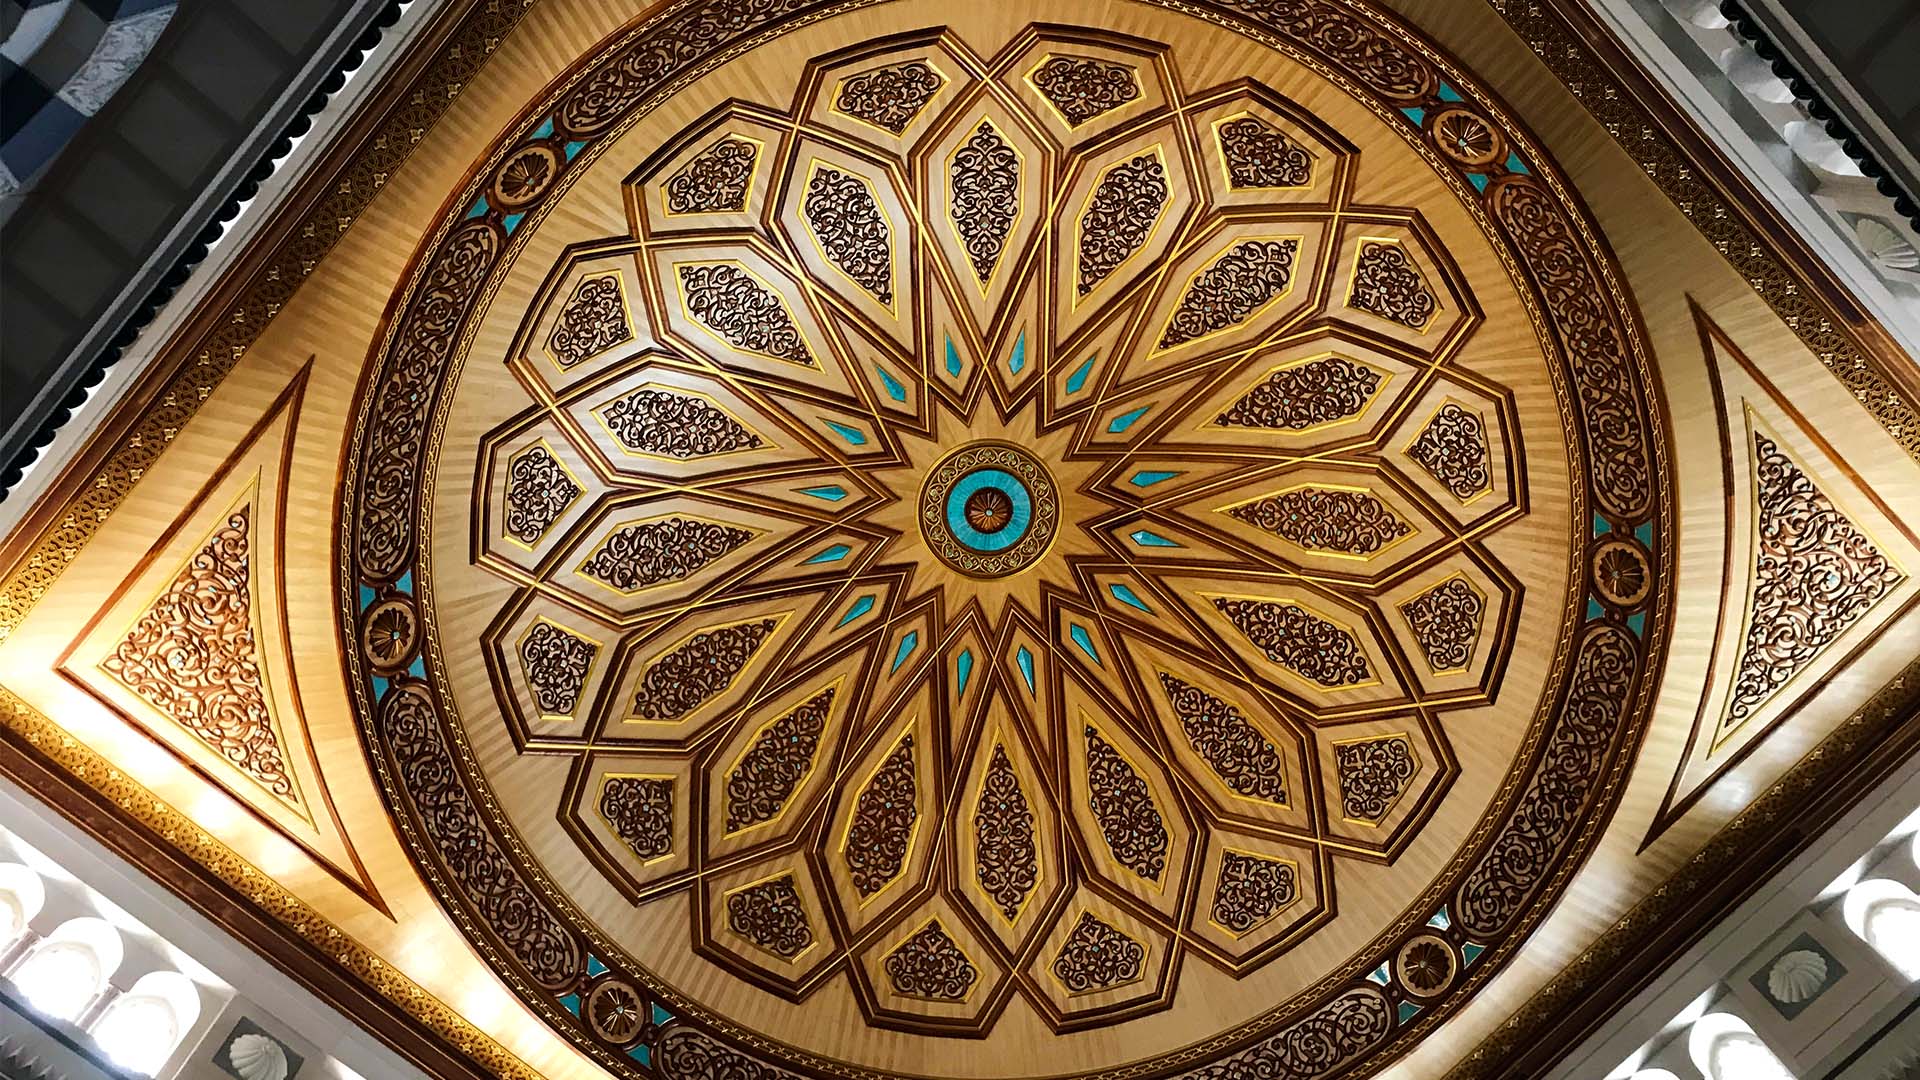 Dome from the inside - Dome with hand-carved ornaments